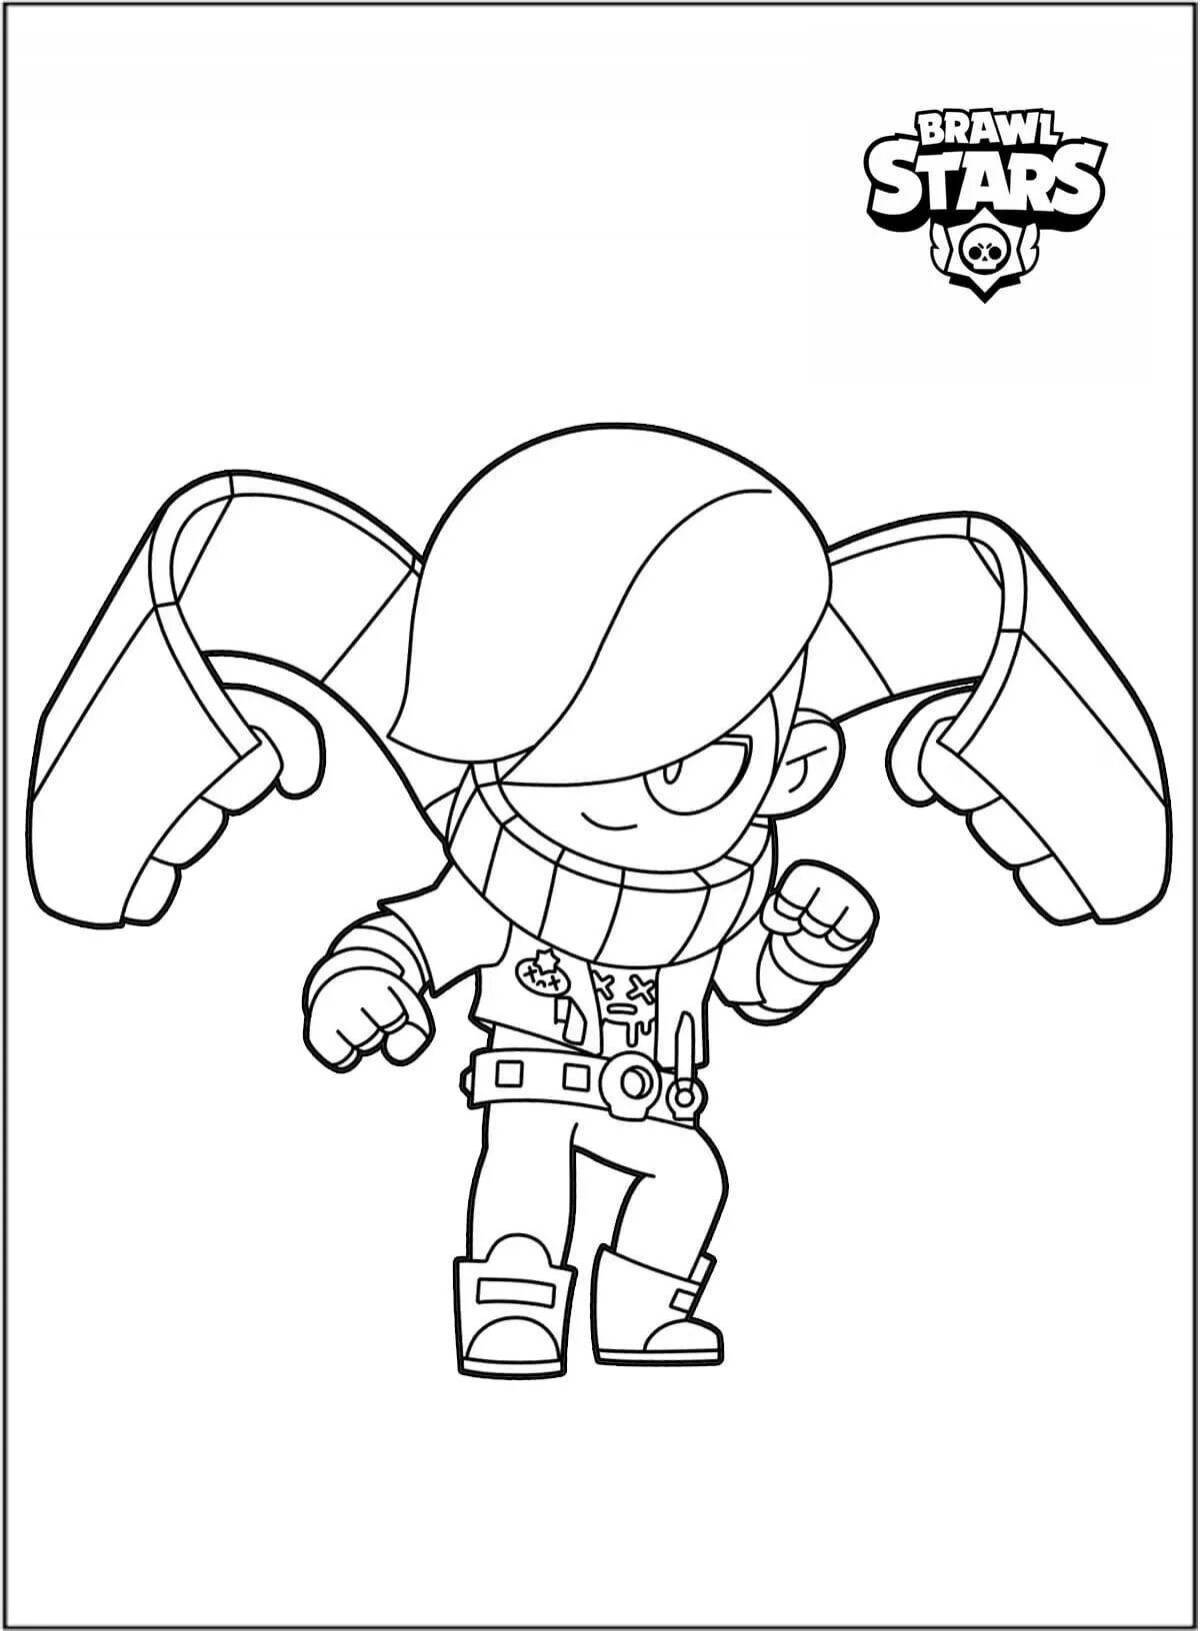 Amazing brastars coloring pages